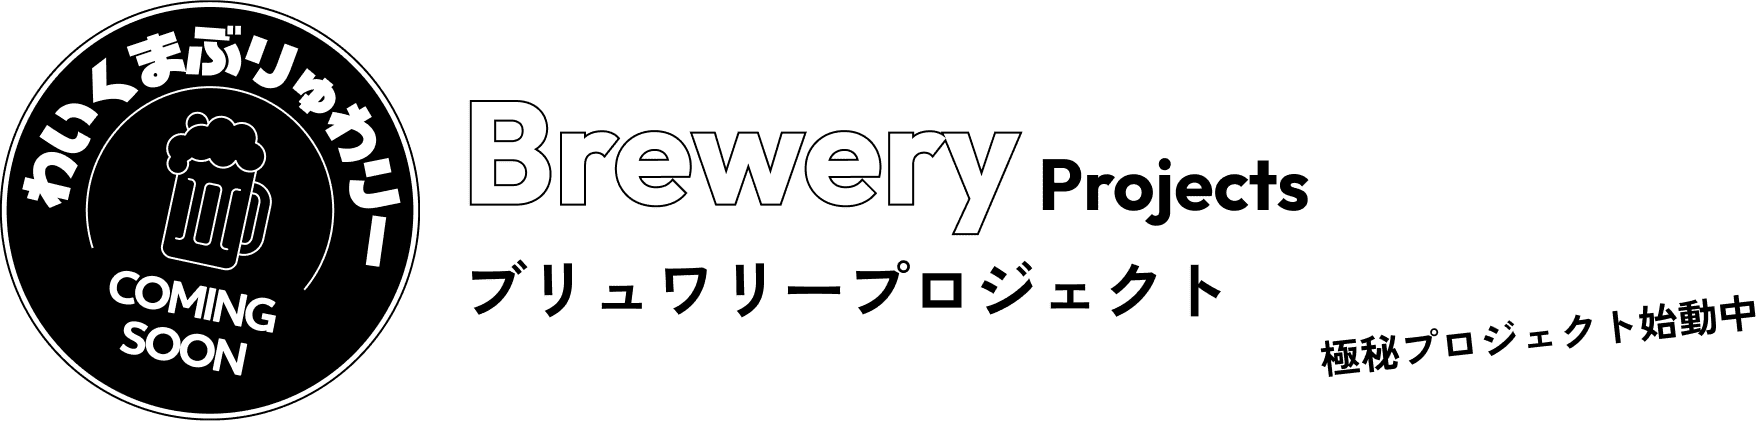 Brewery-projects